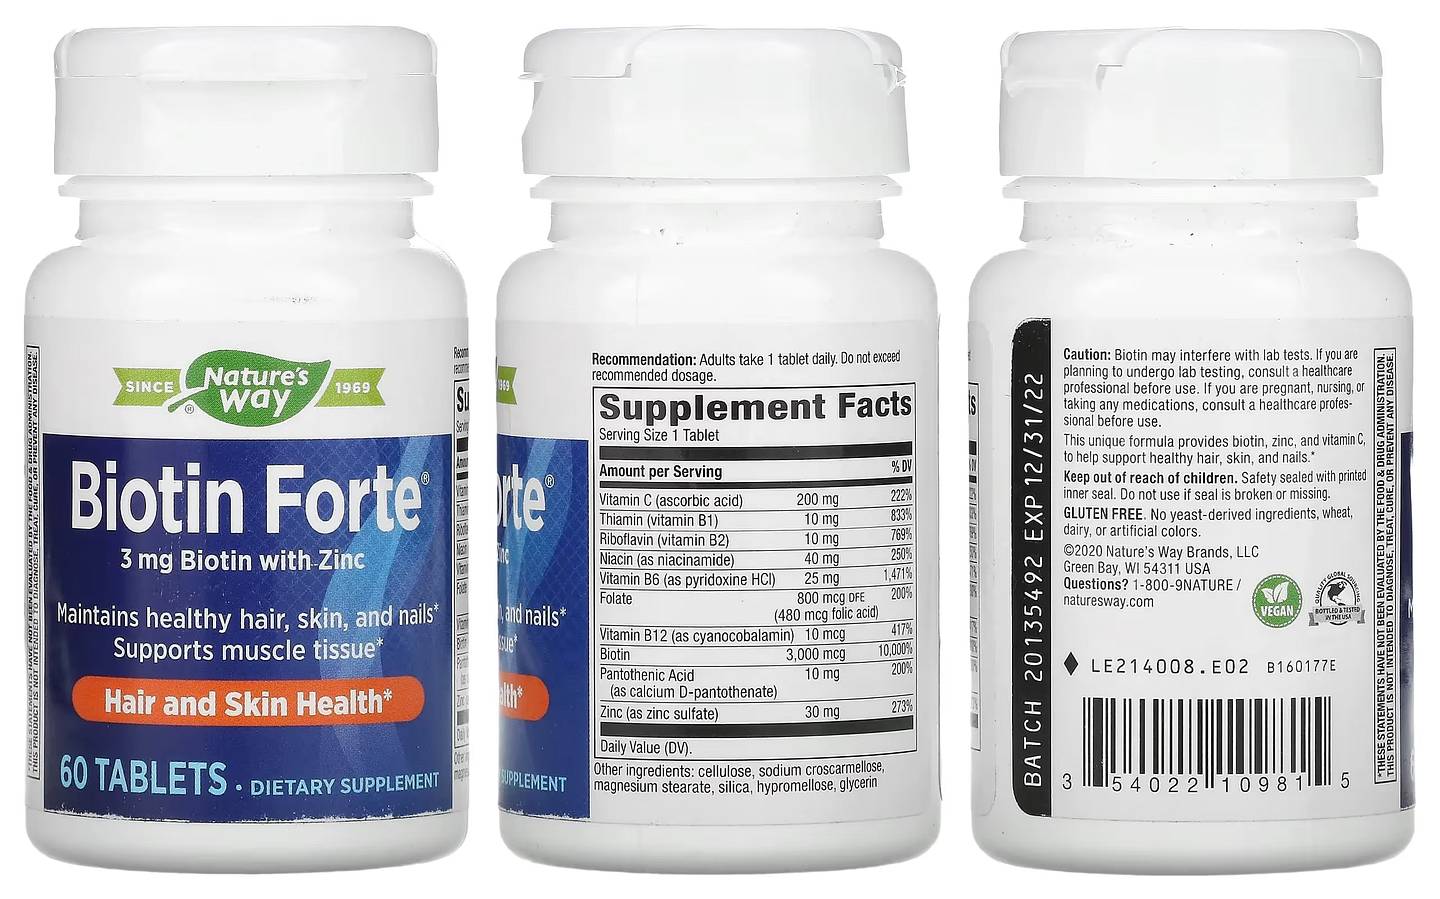 Nature's Way, Biotin Forte with Zinc packaging